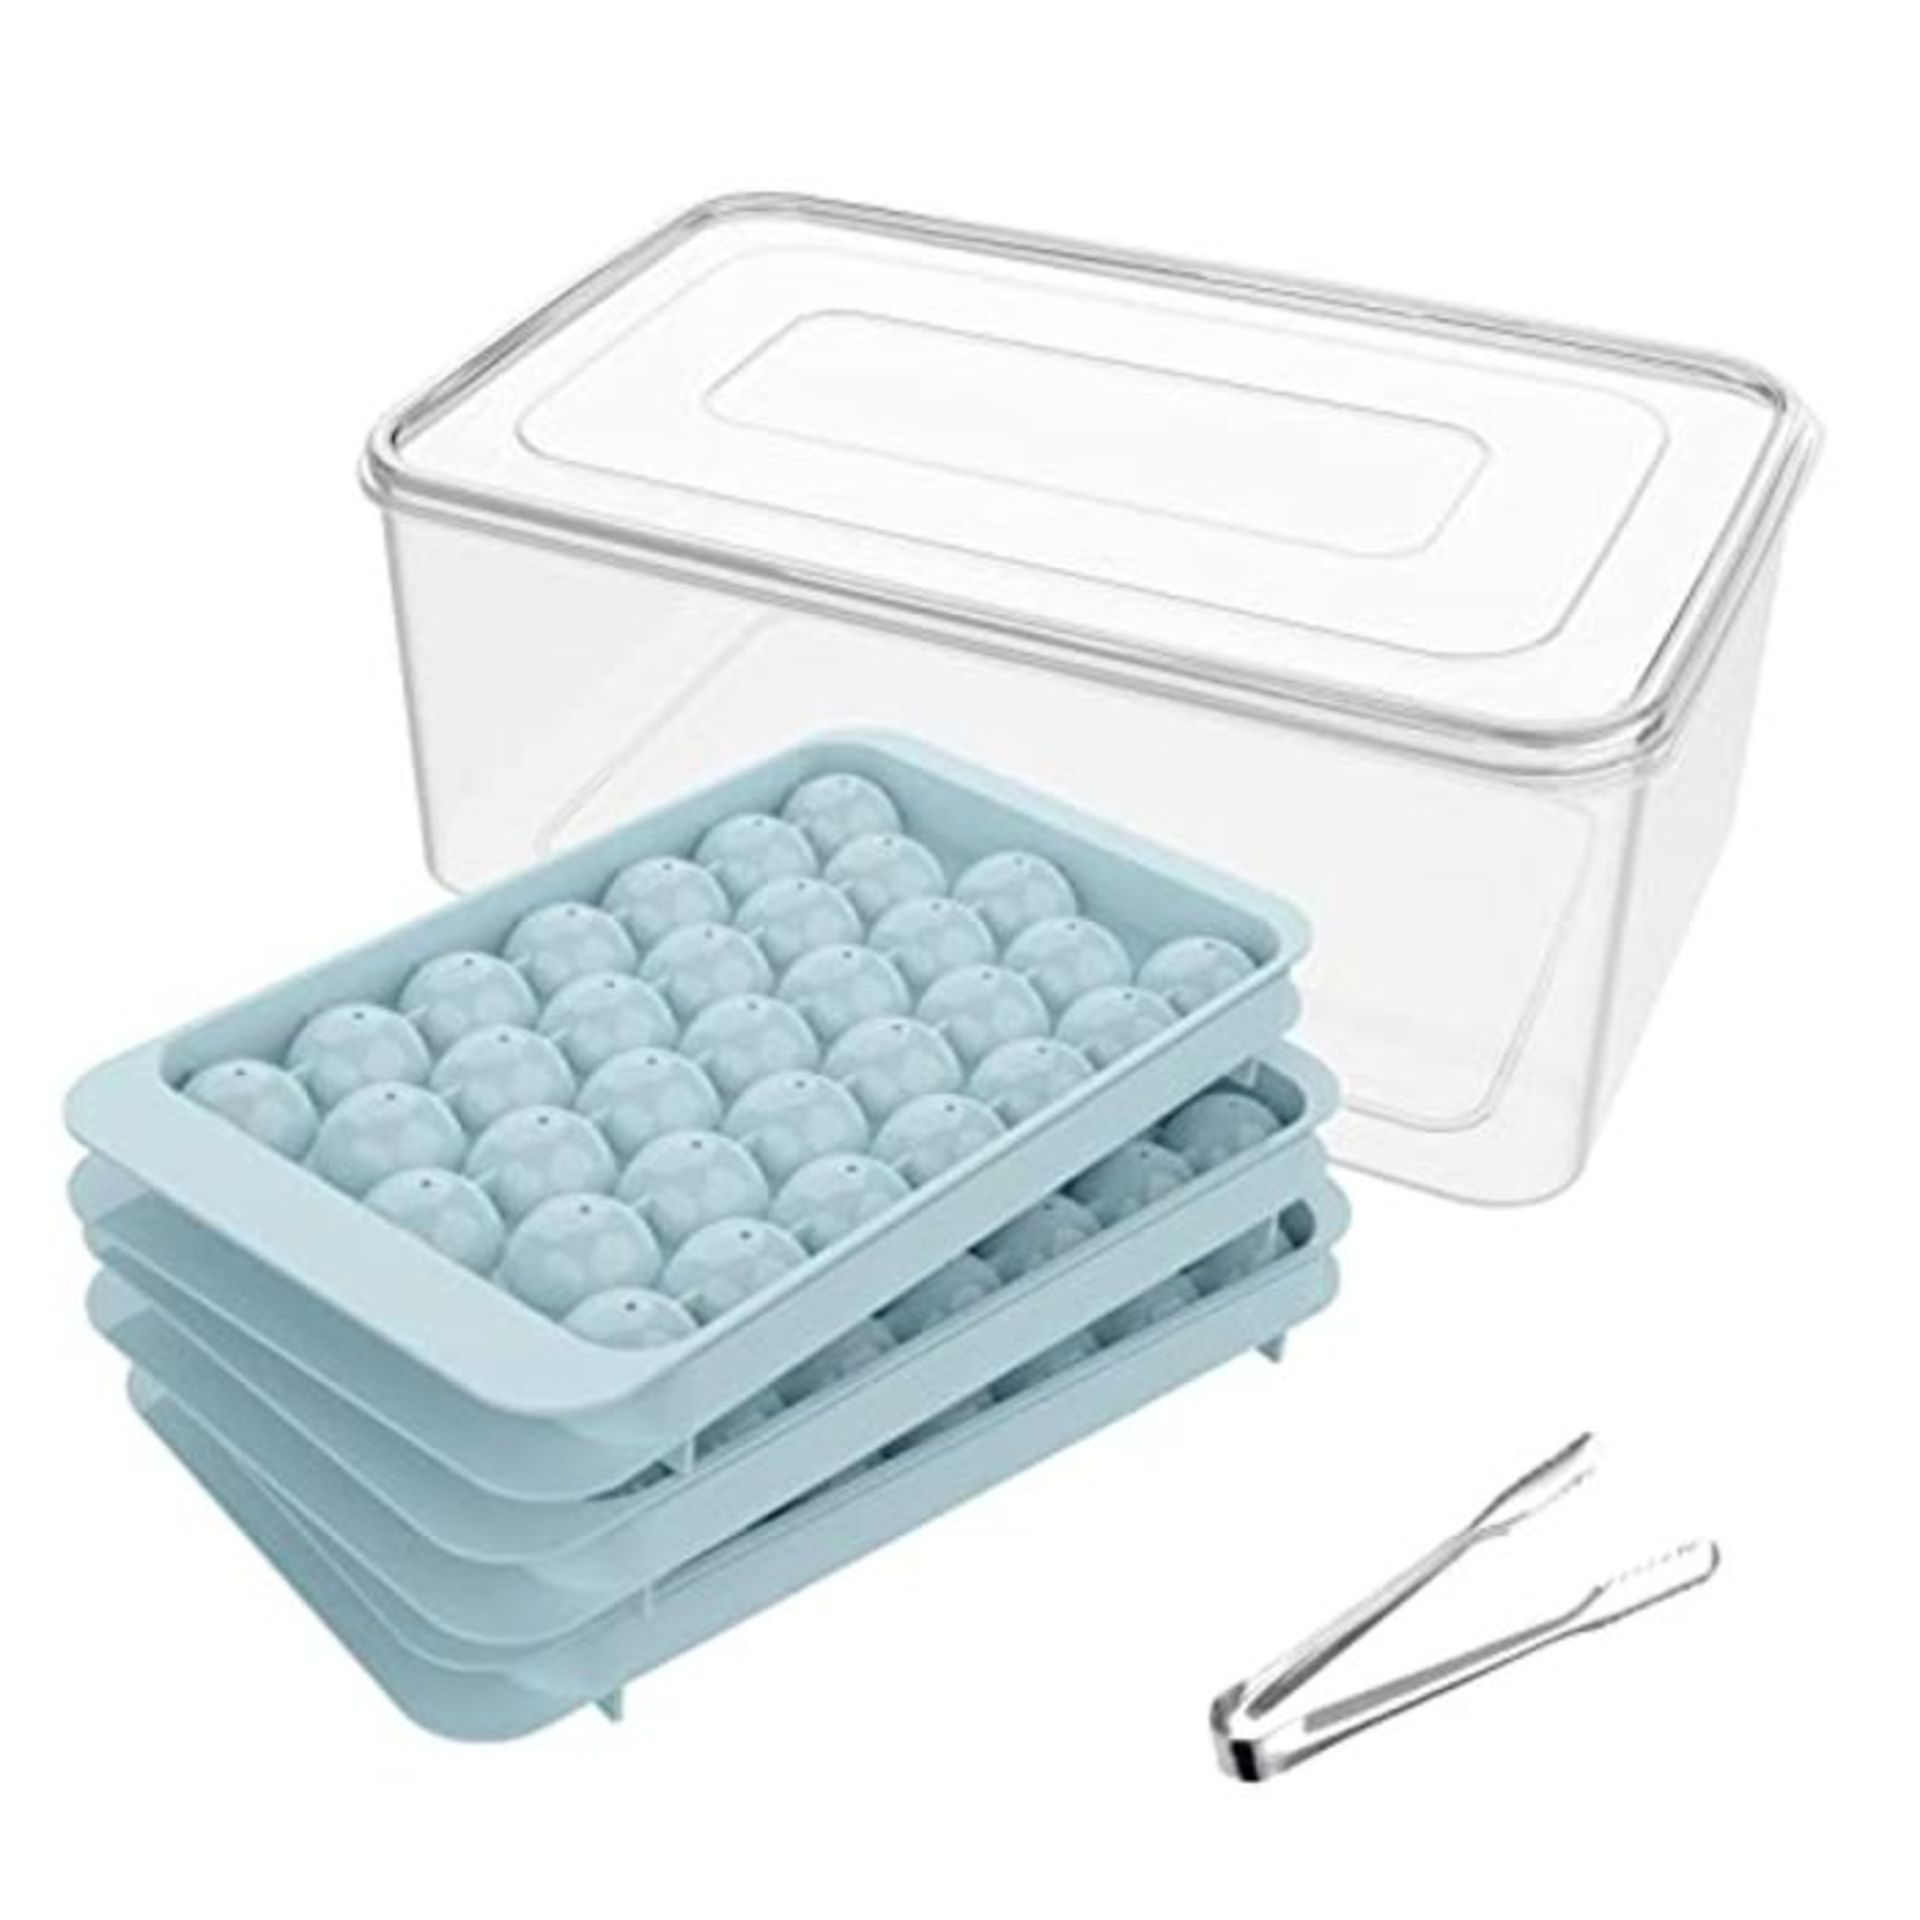 Miaowoof Mini Ice Cube Tray Balls, Round Ice Ball Maker Mould for Freezer,Sphere Ice C